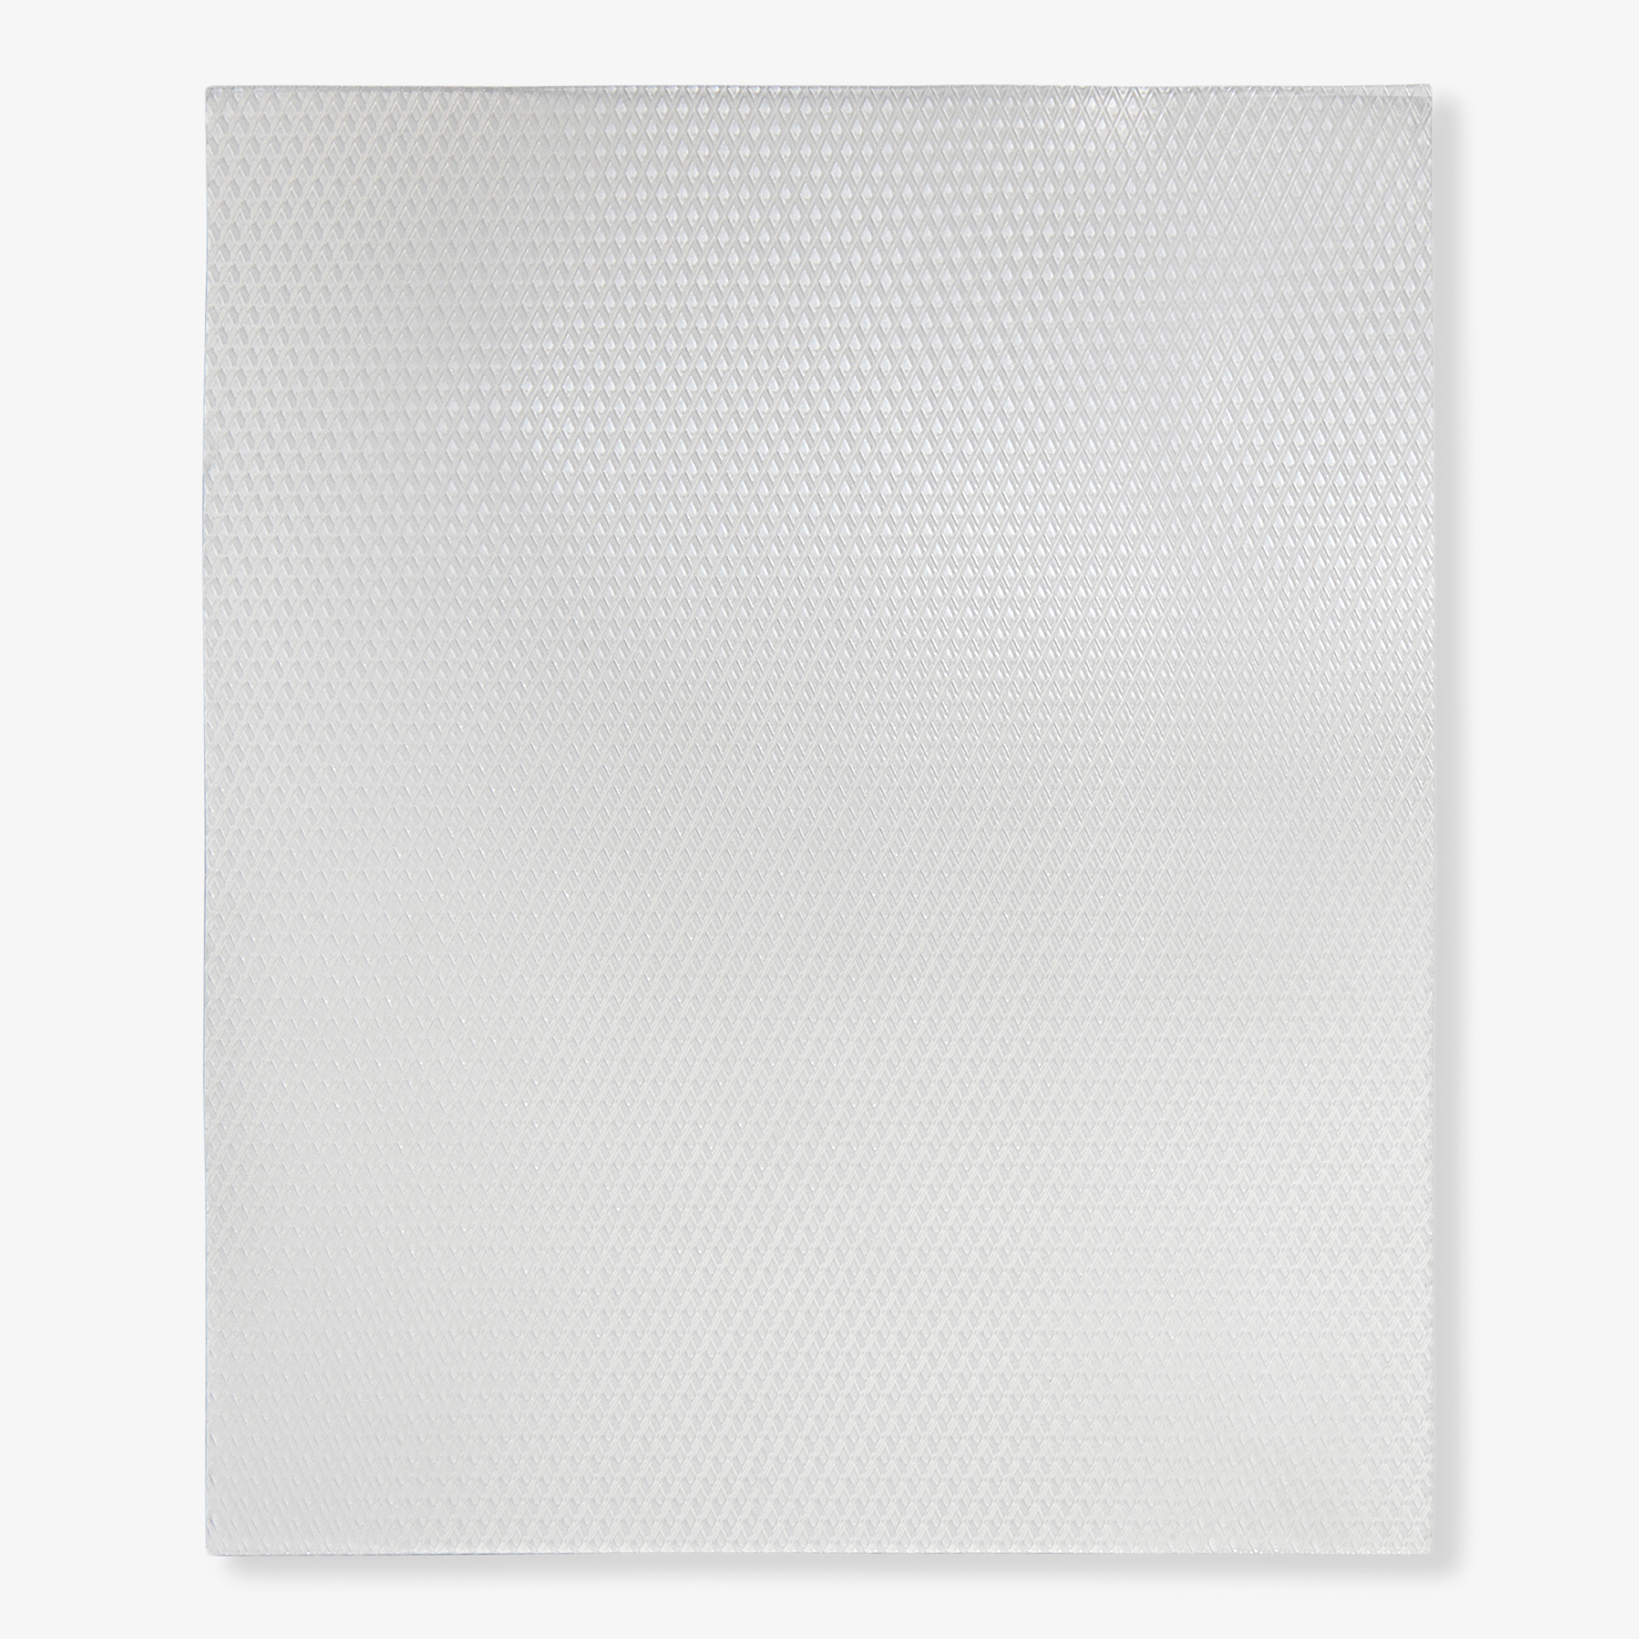 Advanced Medical-Grade Silicone Sheet 5" x 6" top view | clear